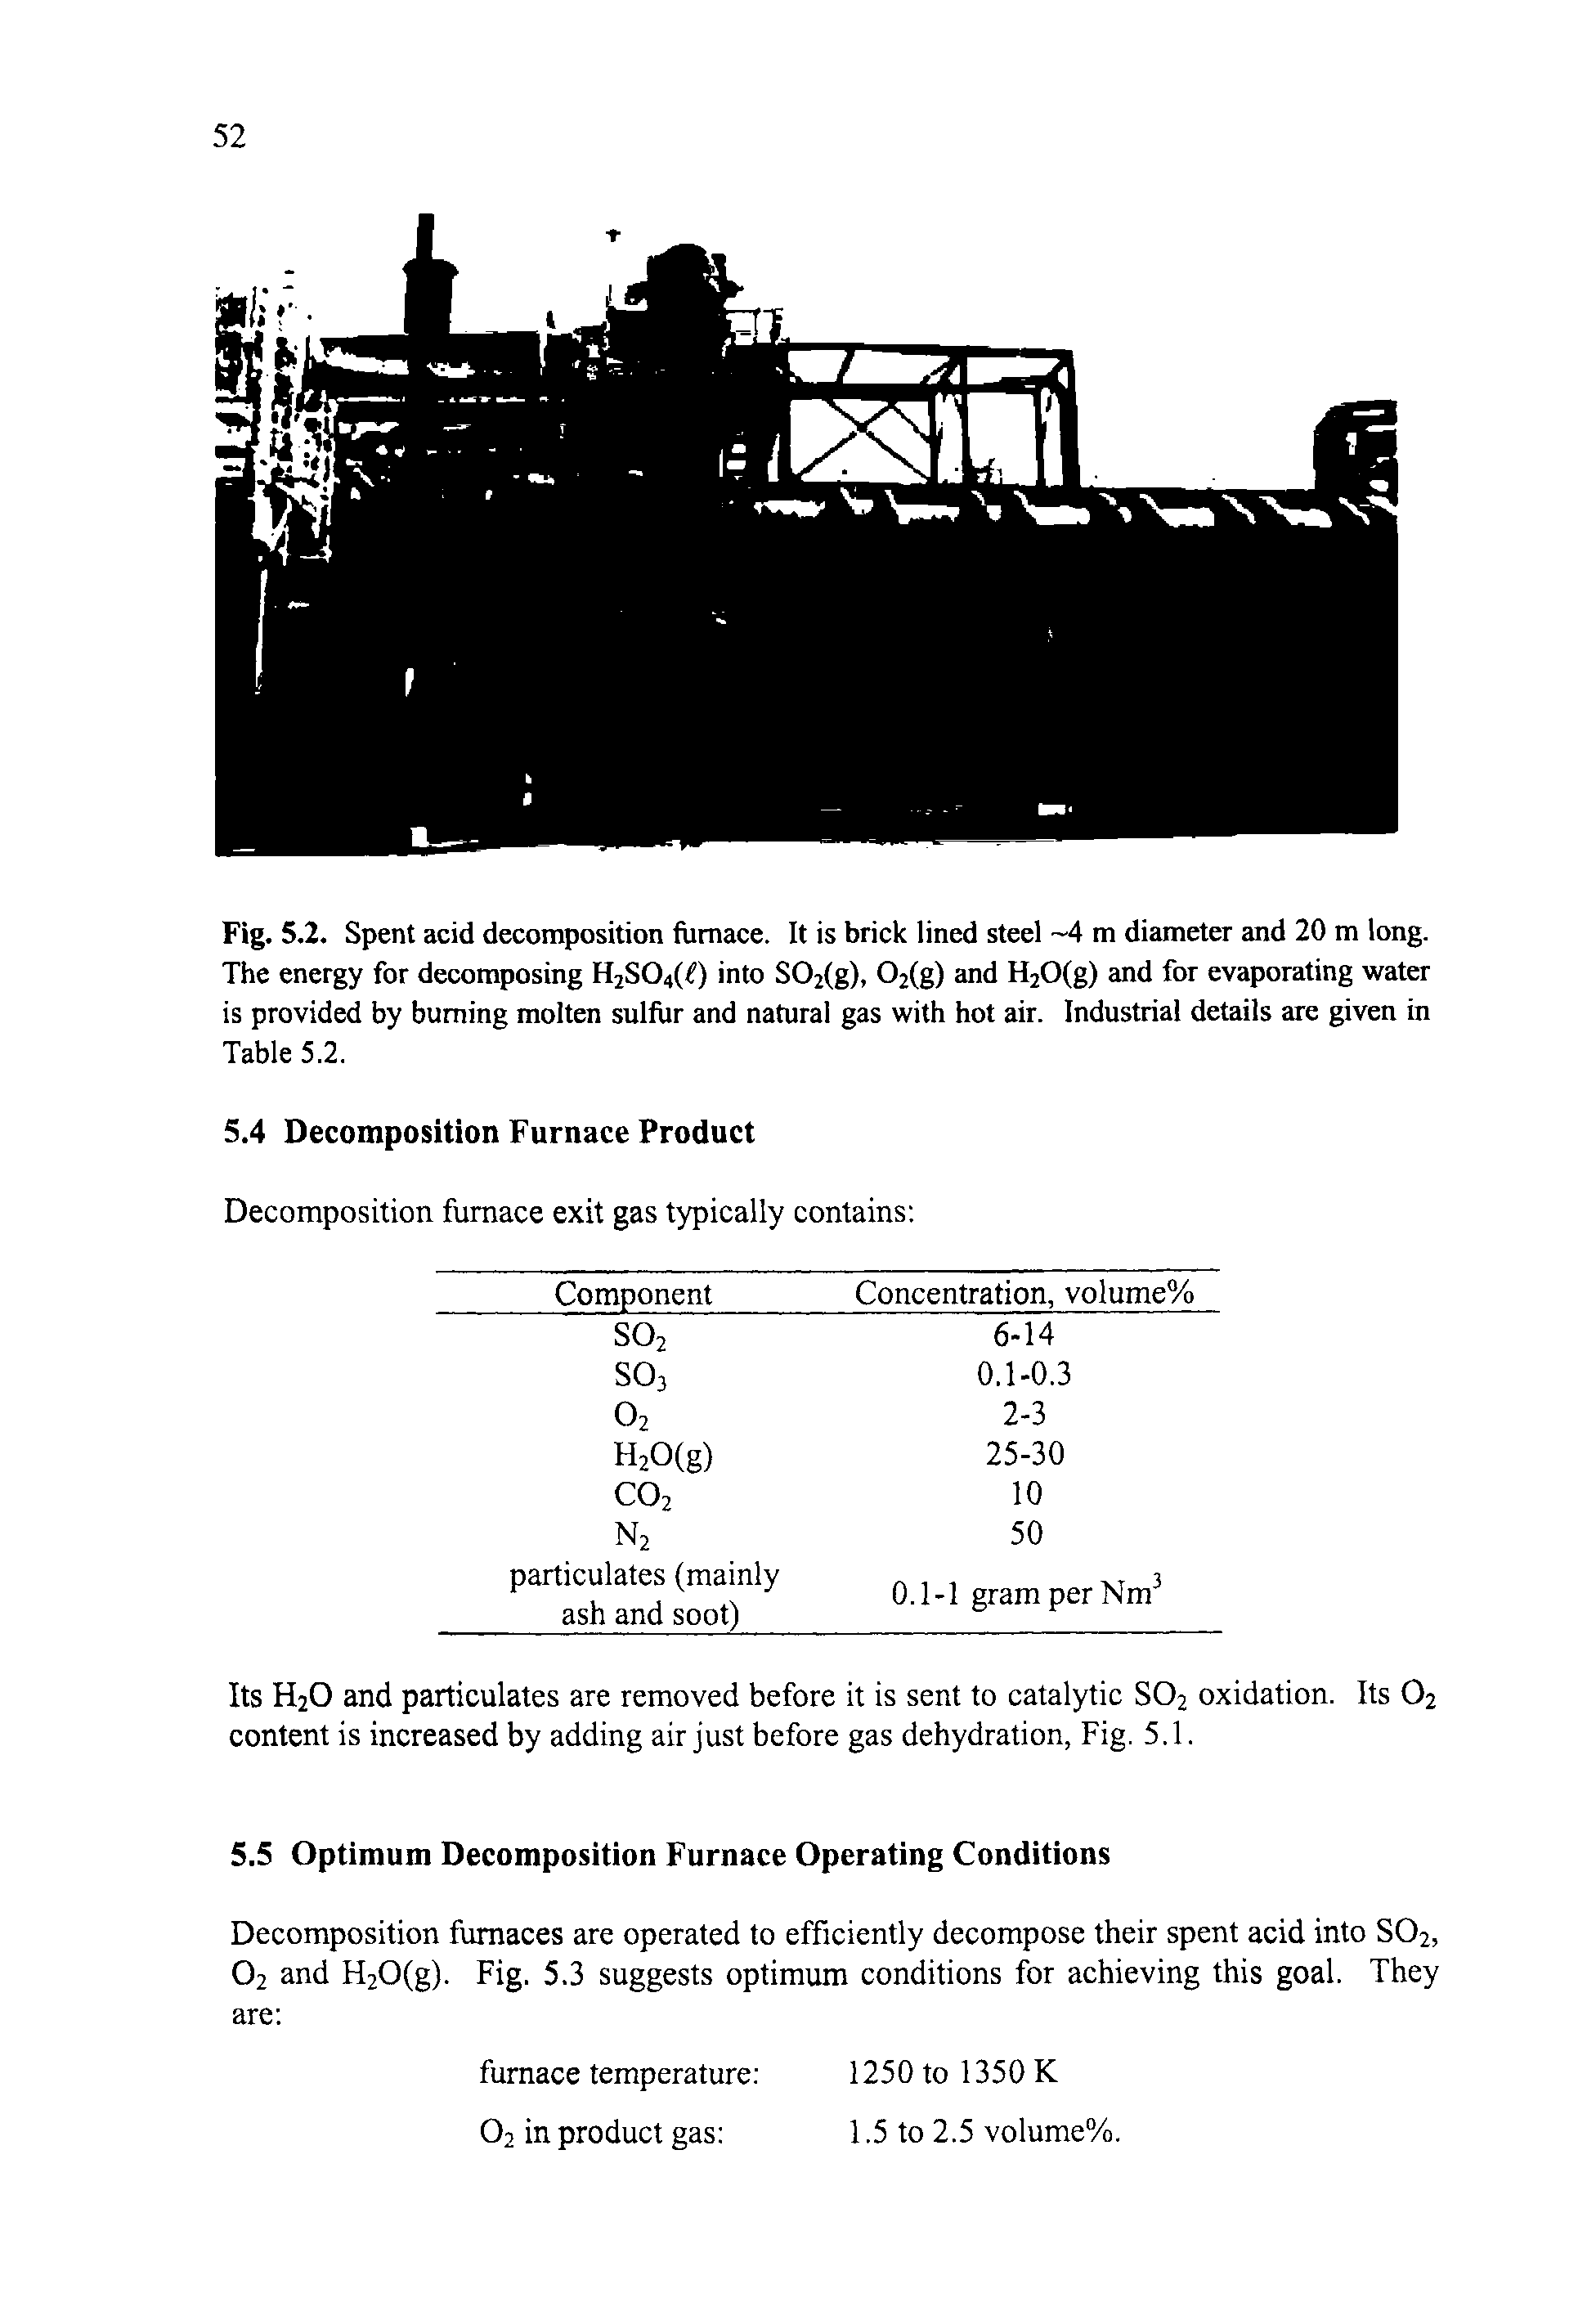 Fig. 5.2. Spent acid decomposition furnace. It is brick lined steel 4 m diameter and 20 m long. The energy for decomposing H2S04(< ) into S02(g), 02(g) and H20(g) and for evaporating water is provided by burning molten sulfur and natural gas with hot air. Industrial details are given in Table 5.2.